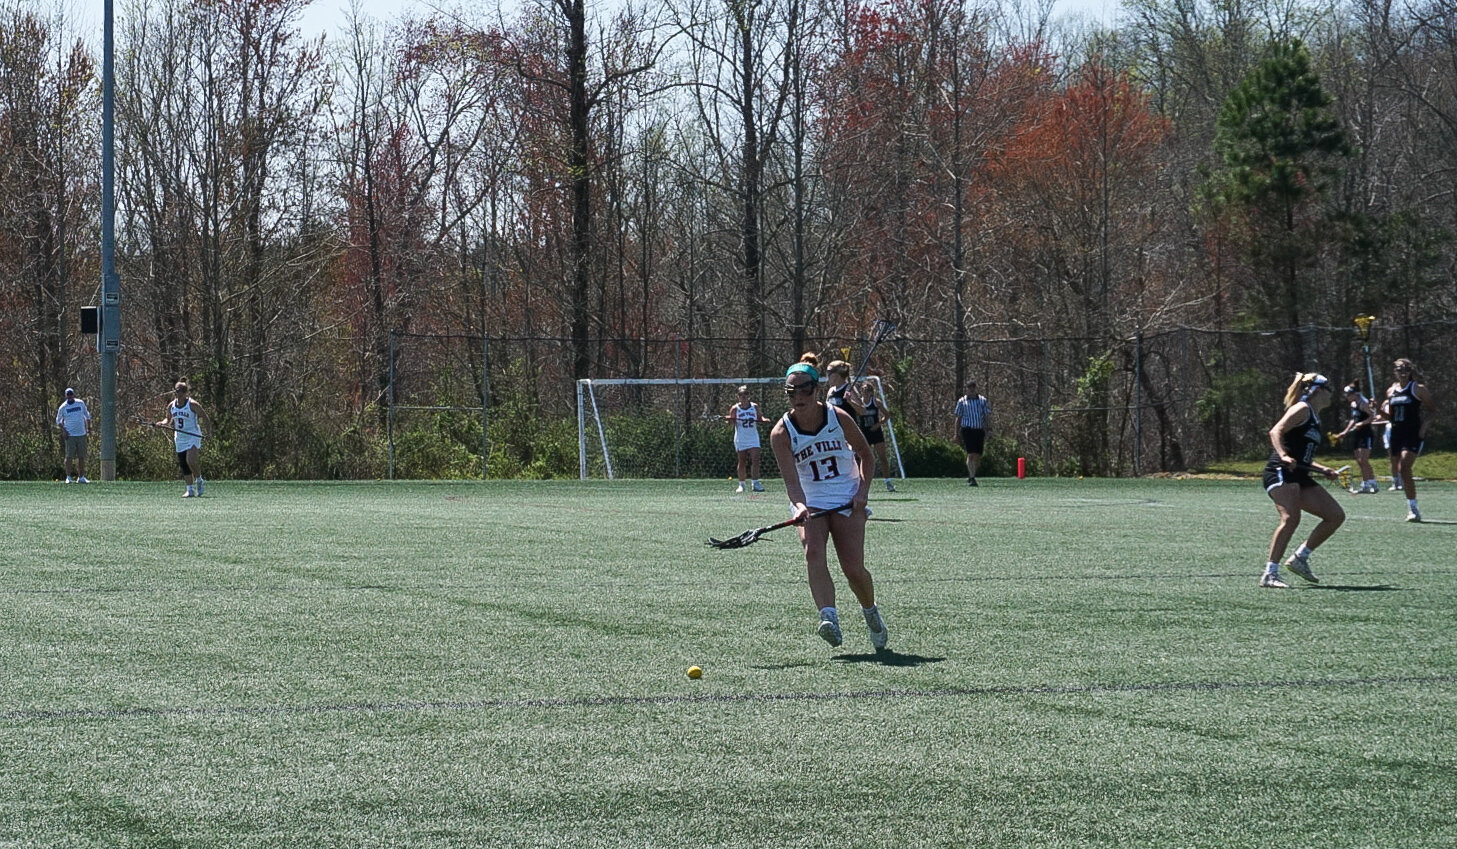 Sophomore Kaitlin OBrien runs to pick up the ball and take it back to the chargers goal.